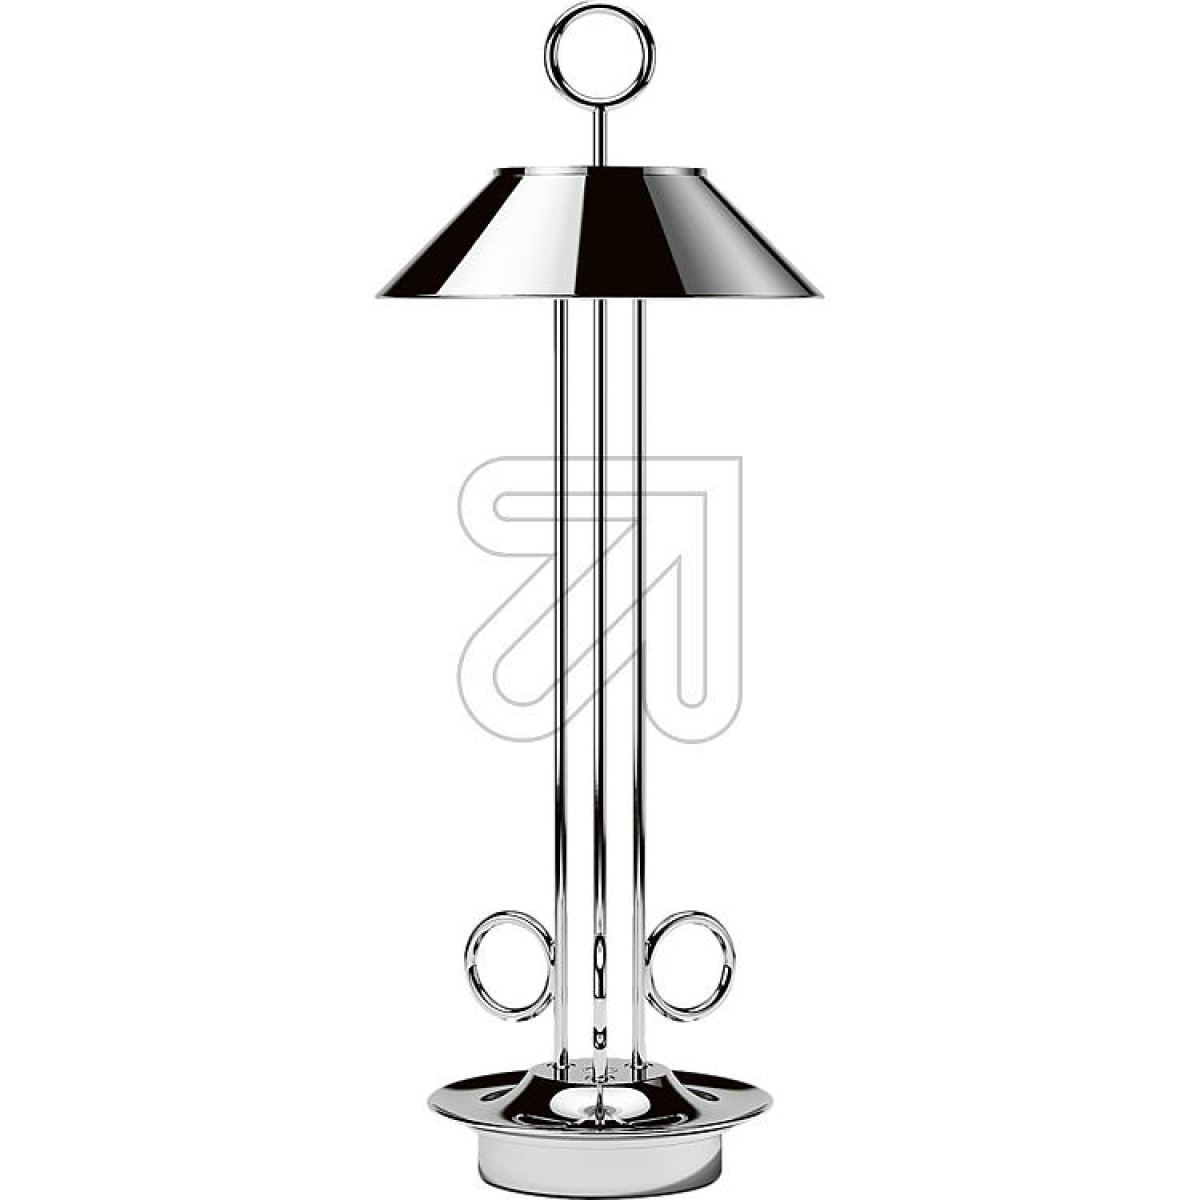 SIGORLED battery-powered table lamp Nudiderot chrome 4701201Article-No: 644090